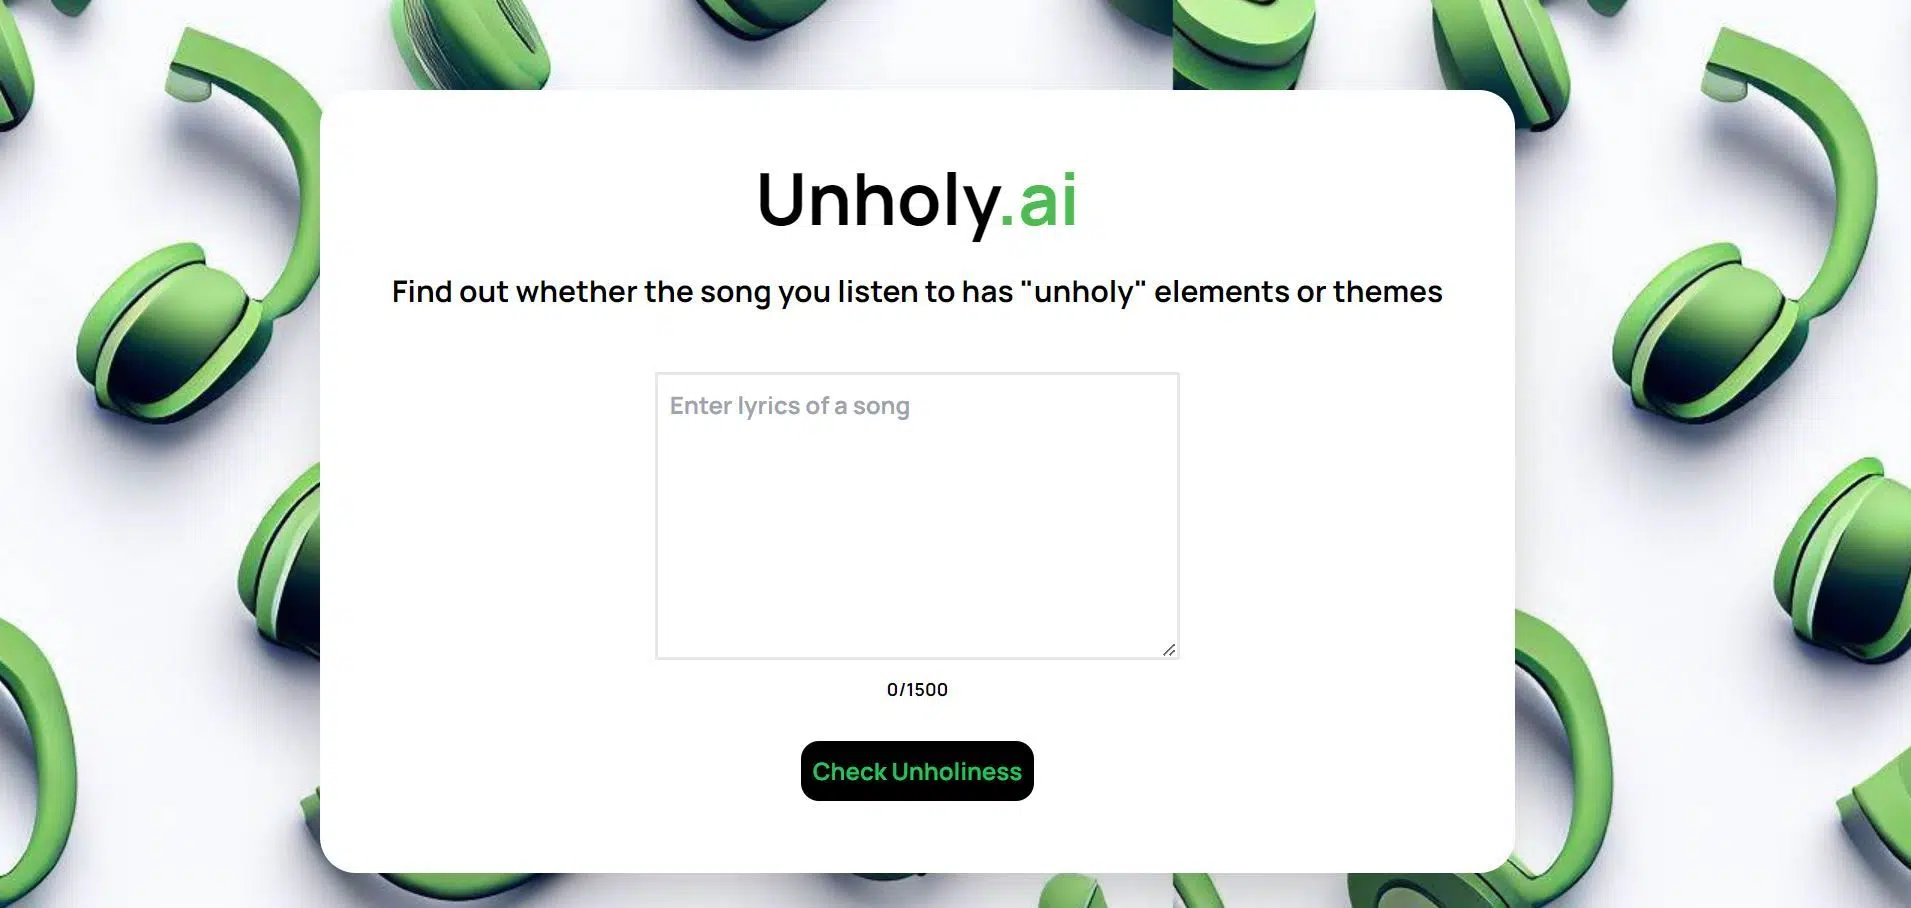 Unholy.aiwebsite picture